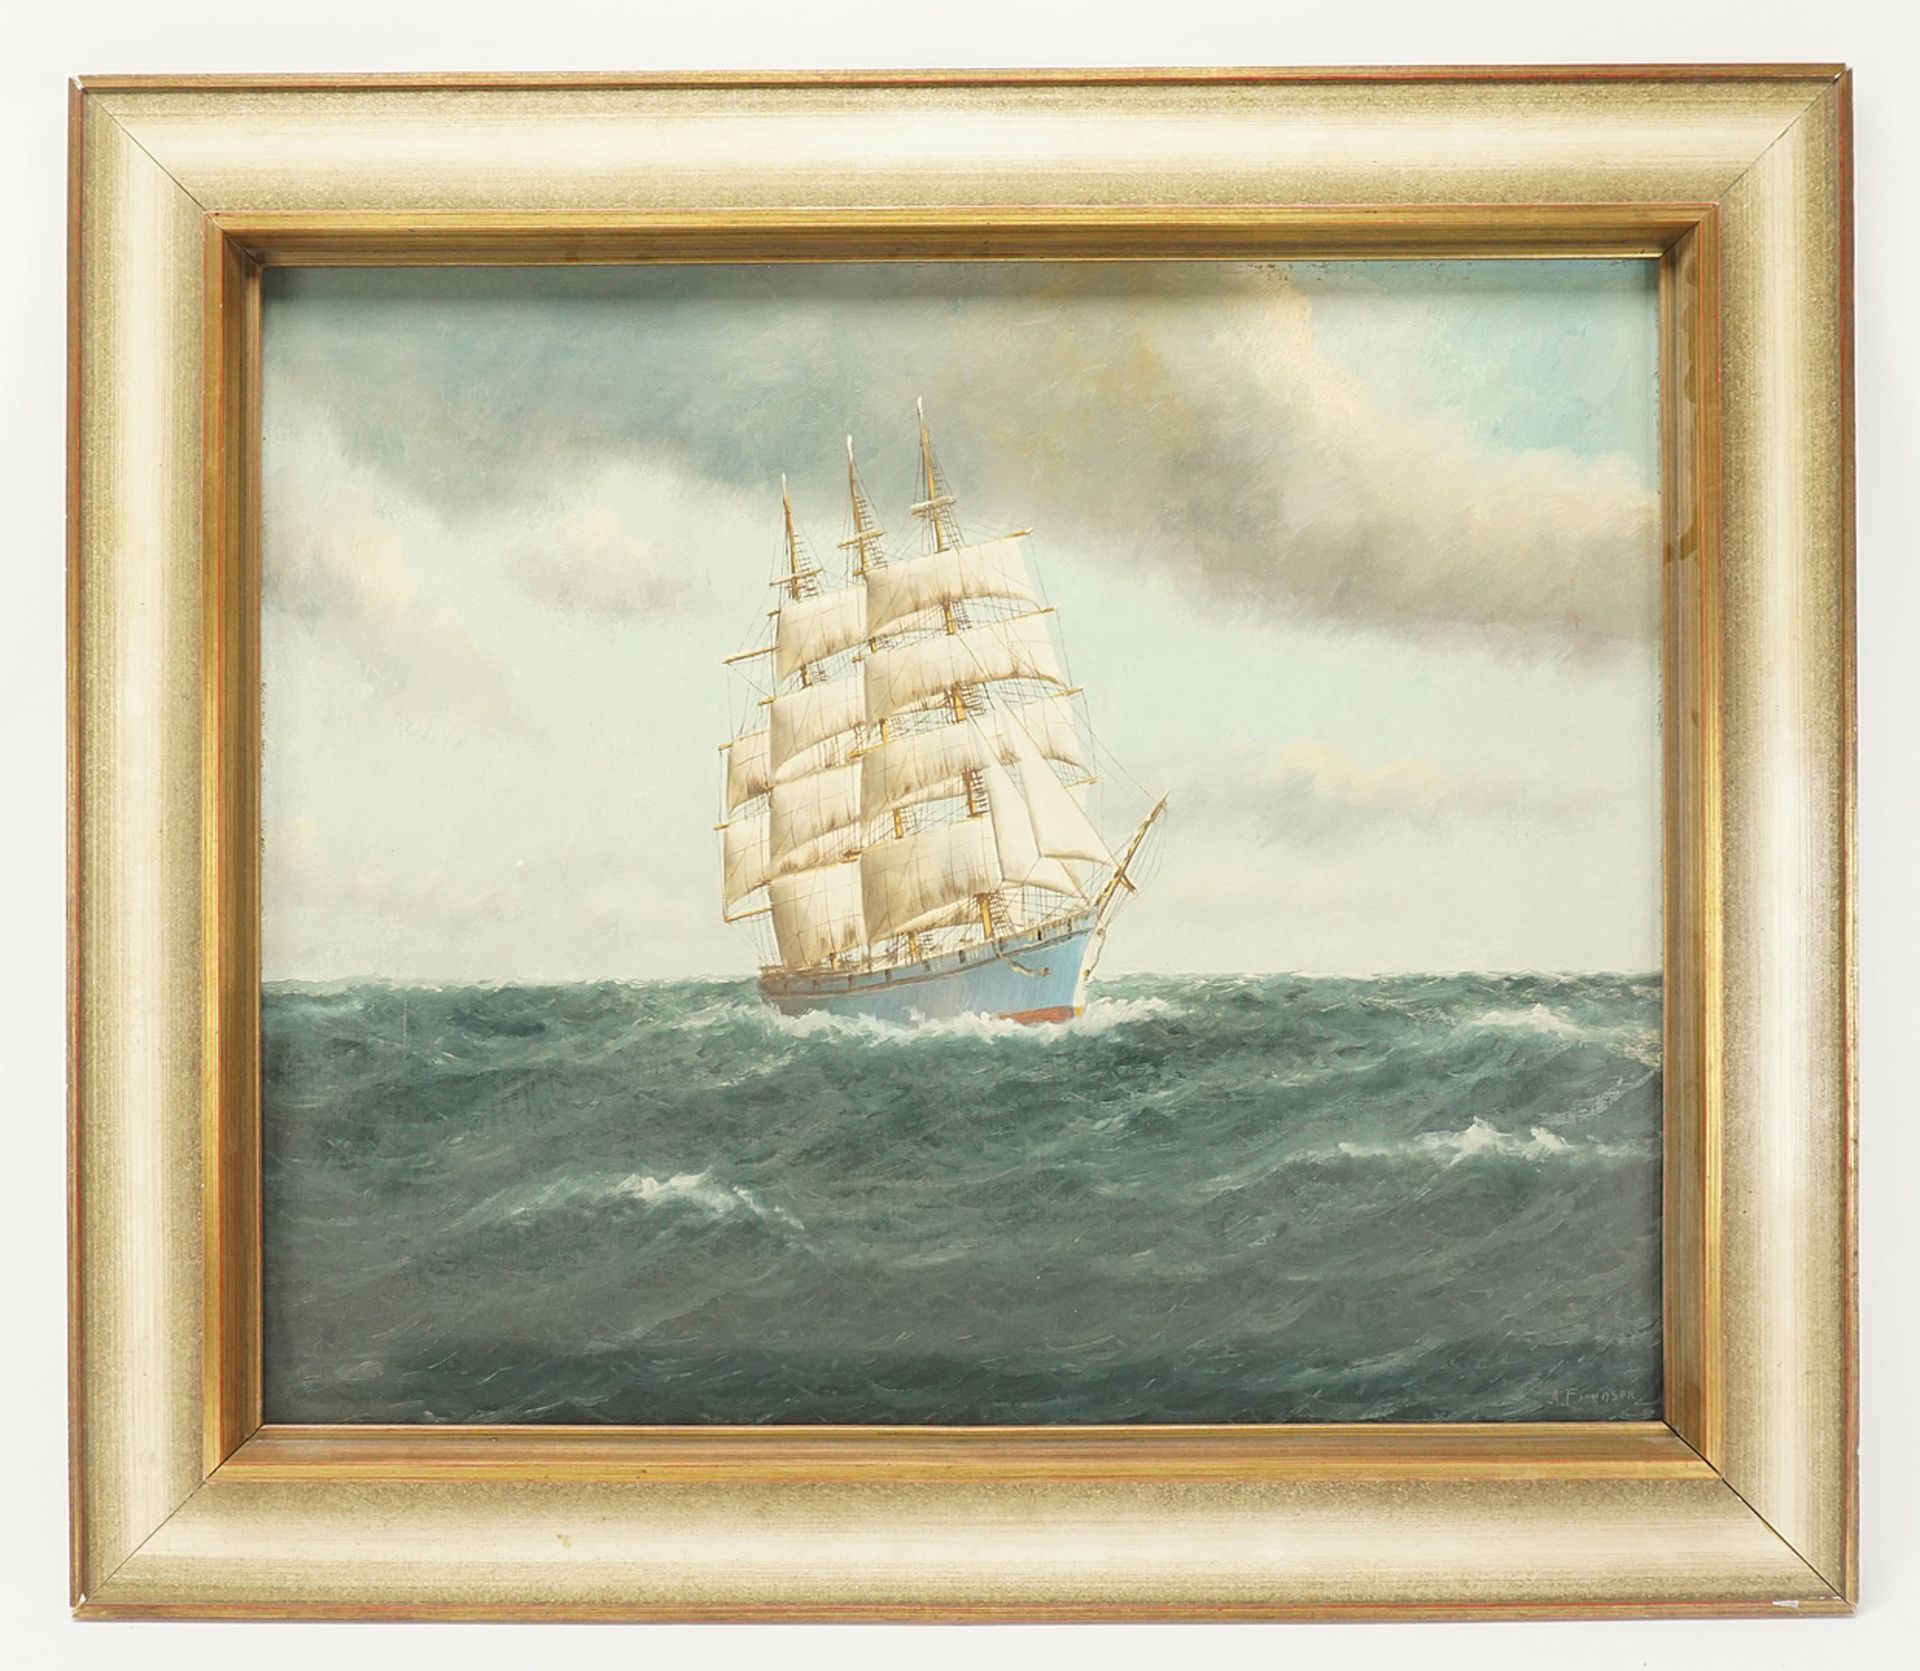 A. Frensen, Three-masted barque on the high seas - Image 2 of 4